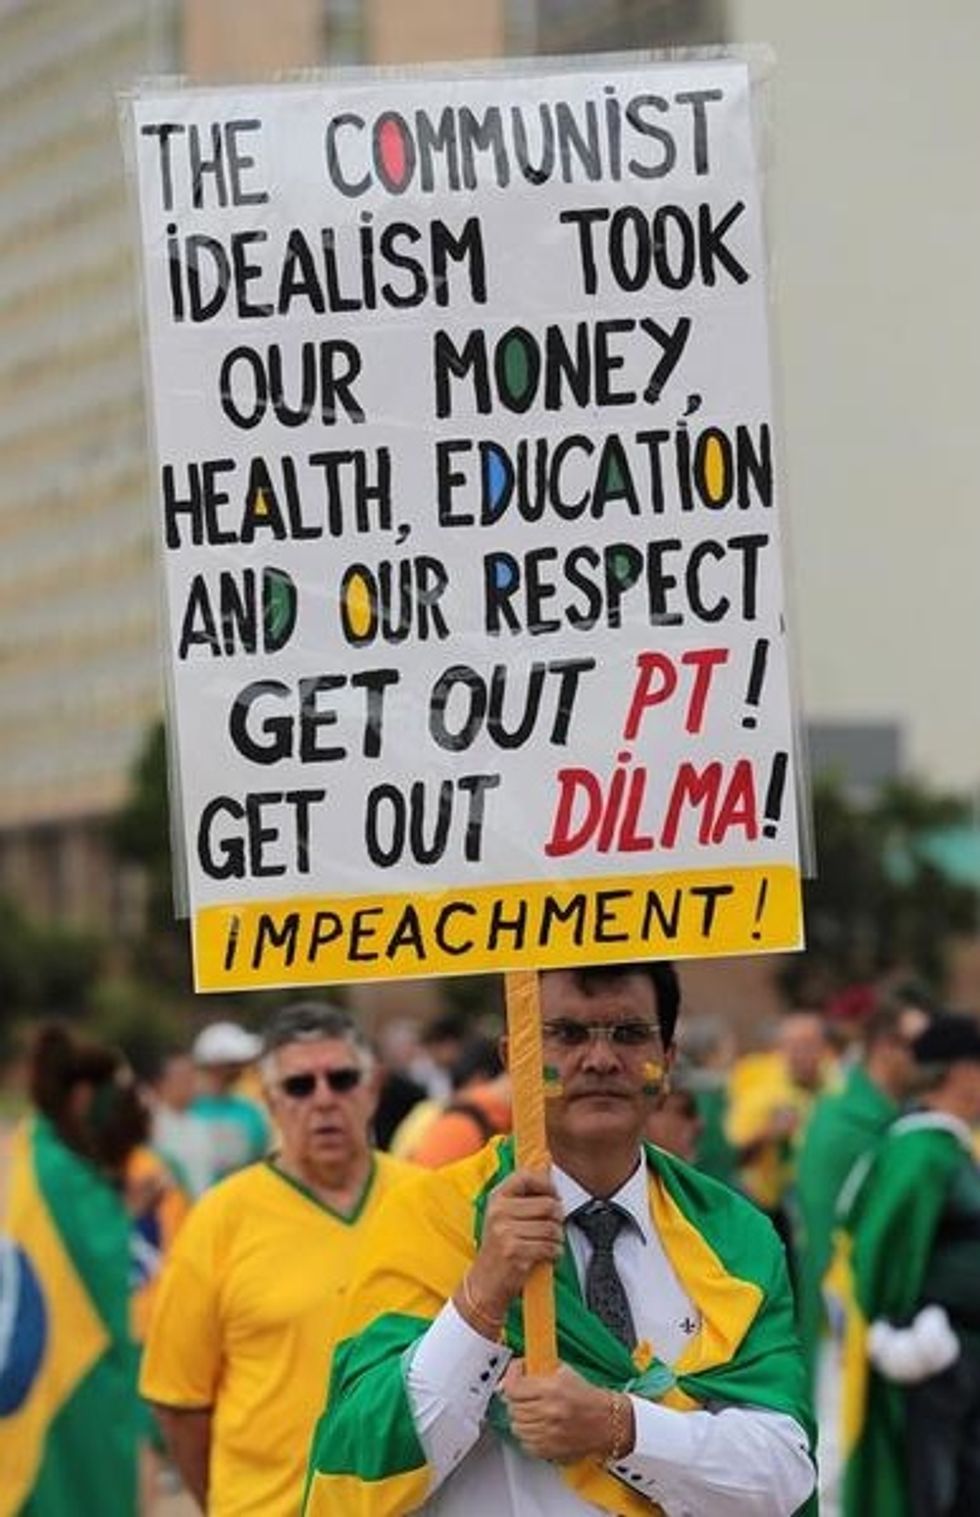 Brazilians Rally Against Leftist Government, Call for Military Coup Instead 